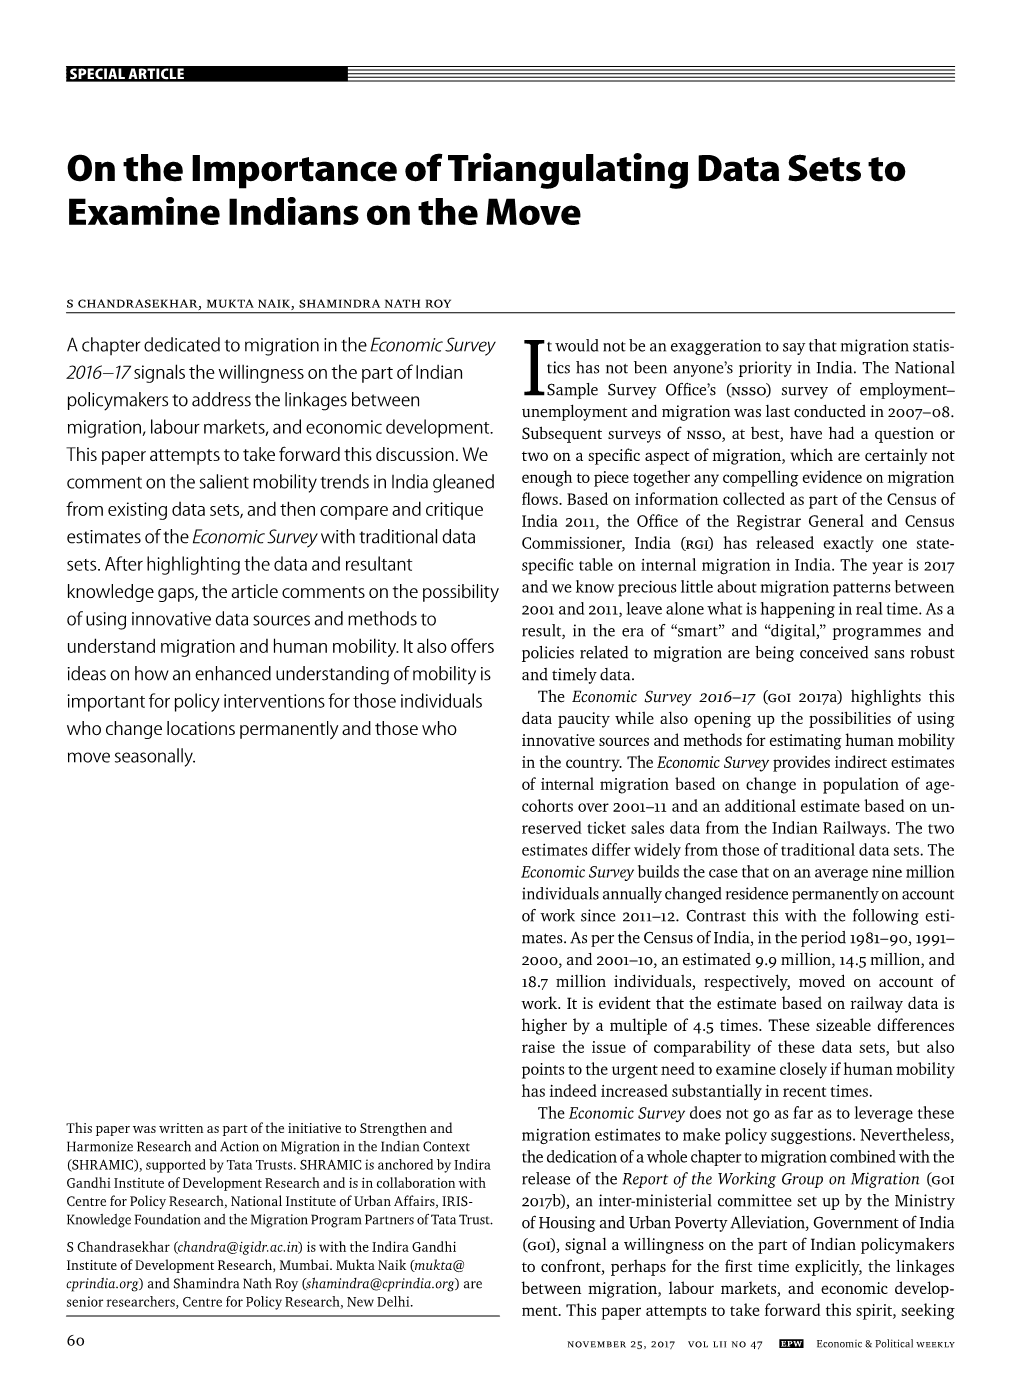 On the Importance of Triangulating Data Sets to Examine Indians on the Move